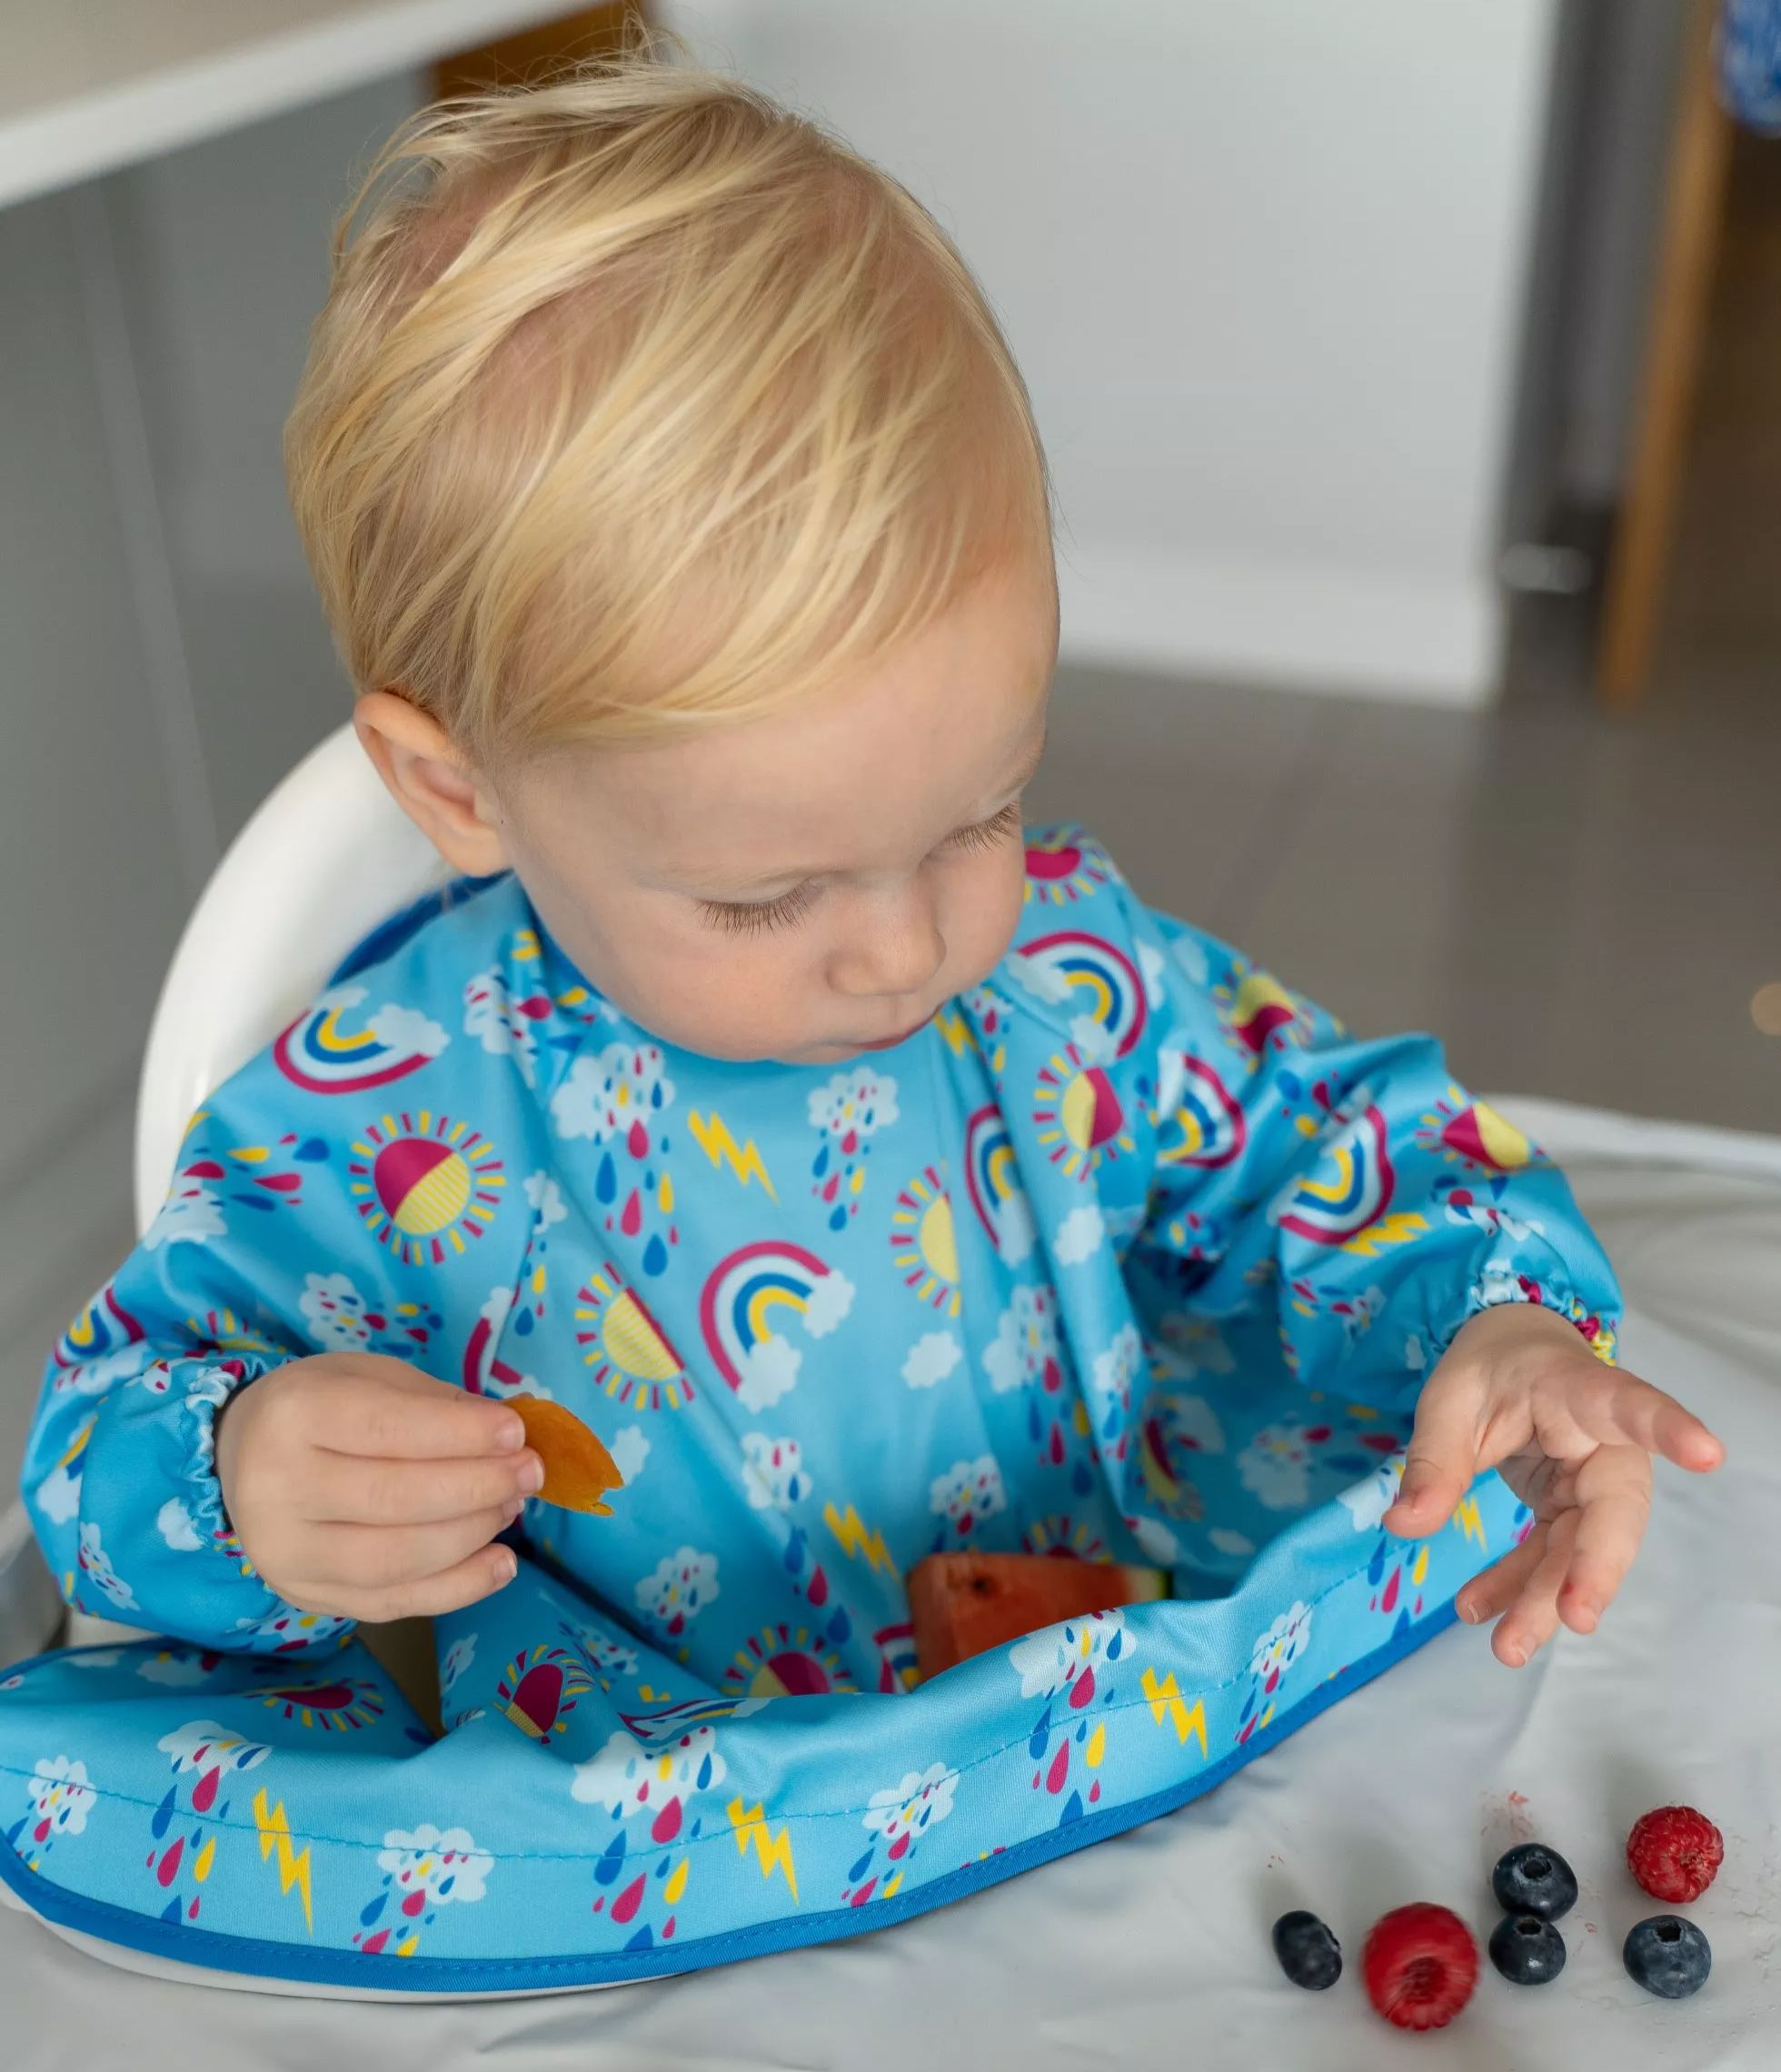 Tidy Tot Long Length Coverall Bib for Feeding or Sensory Play - Latte  Parents